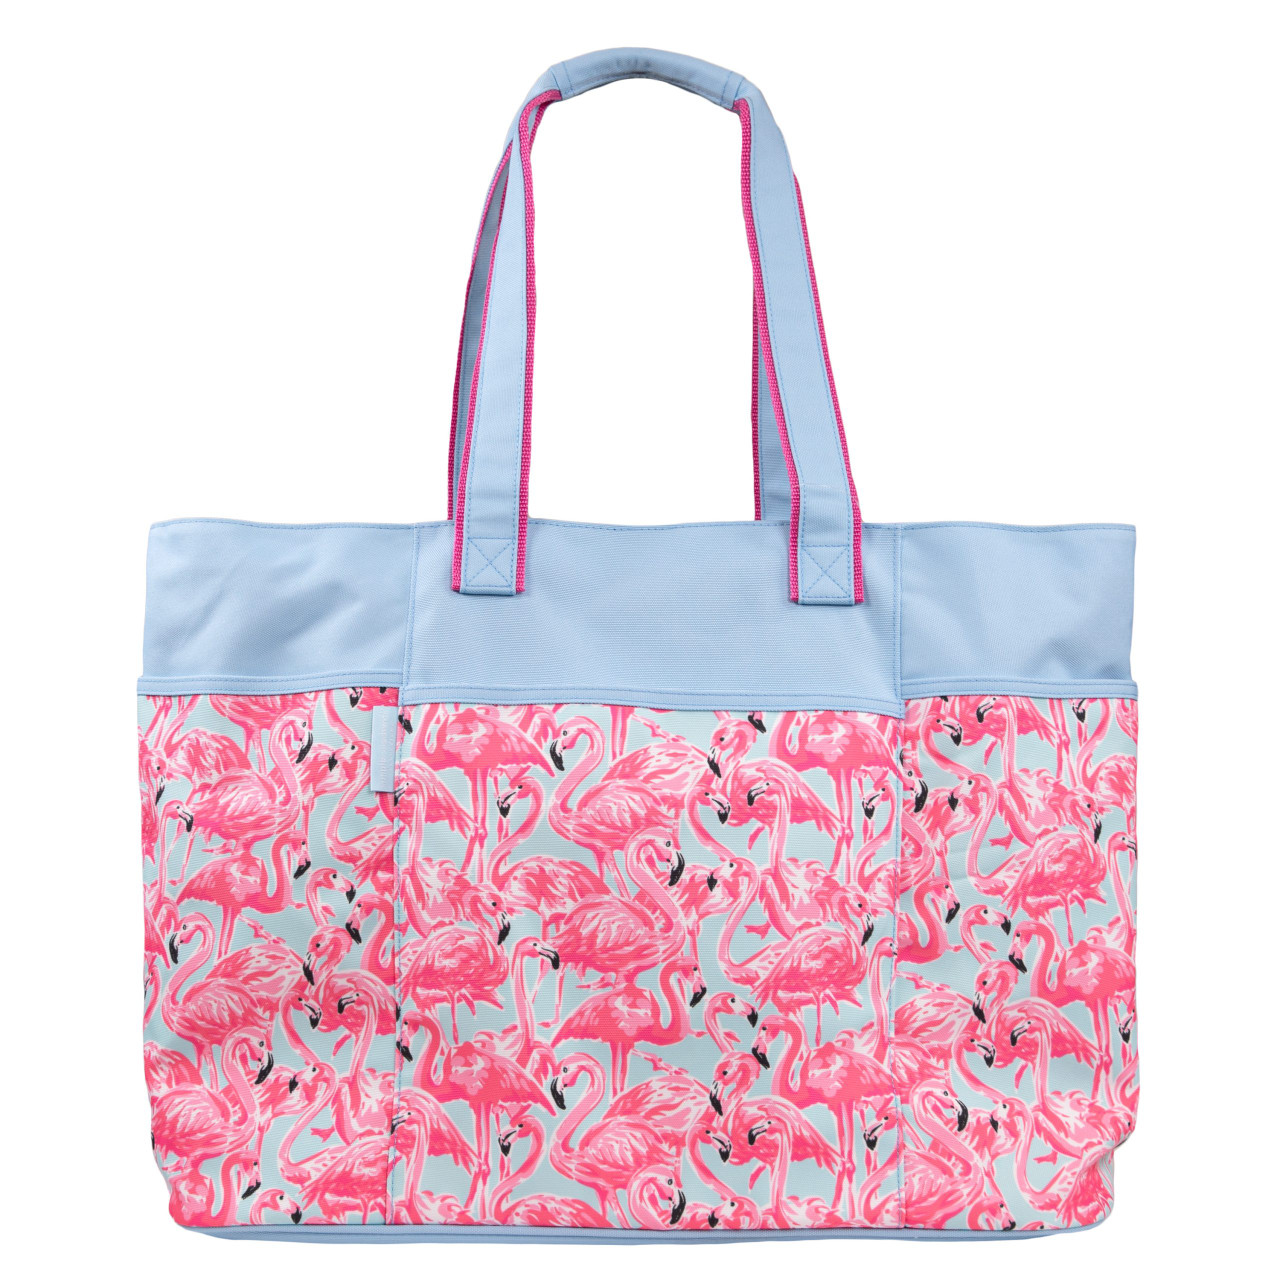 SIMPLY SOUTHERN BEACH TOTE FLAMINGO - Pee Dee Outfitters